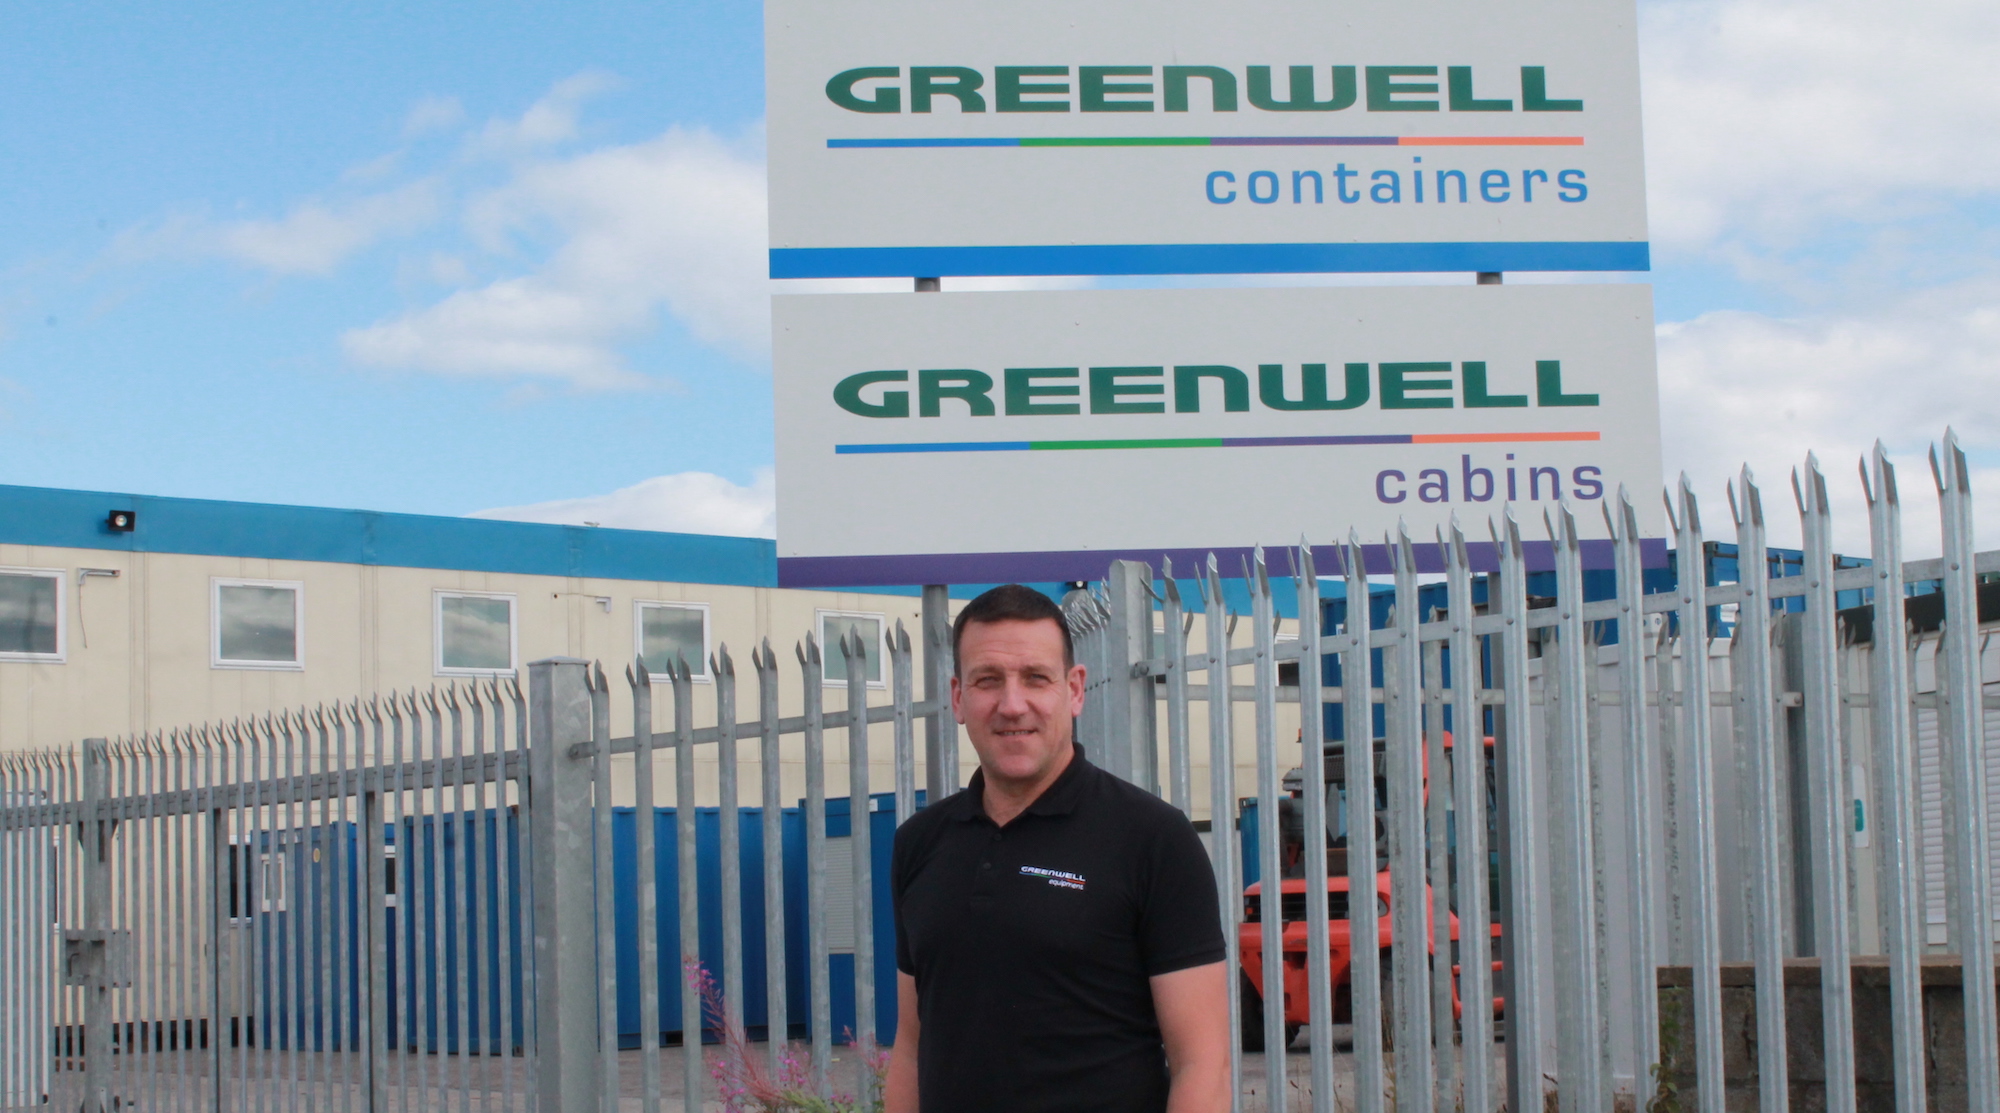 Greenwell Equipment rack up £6 million turnover with record orders